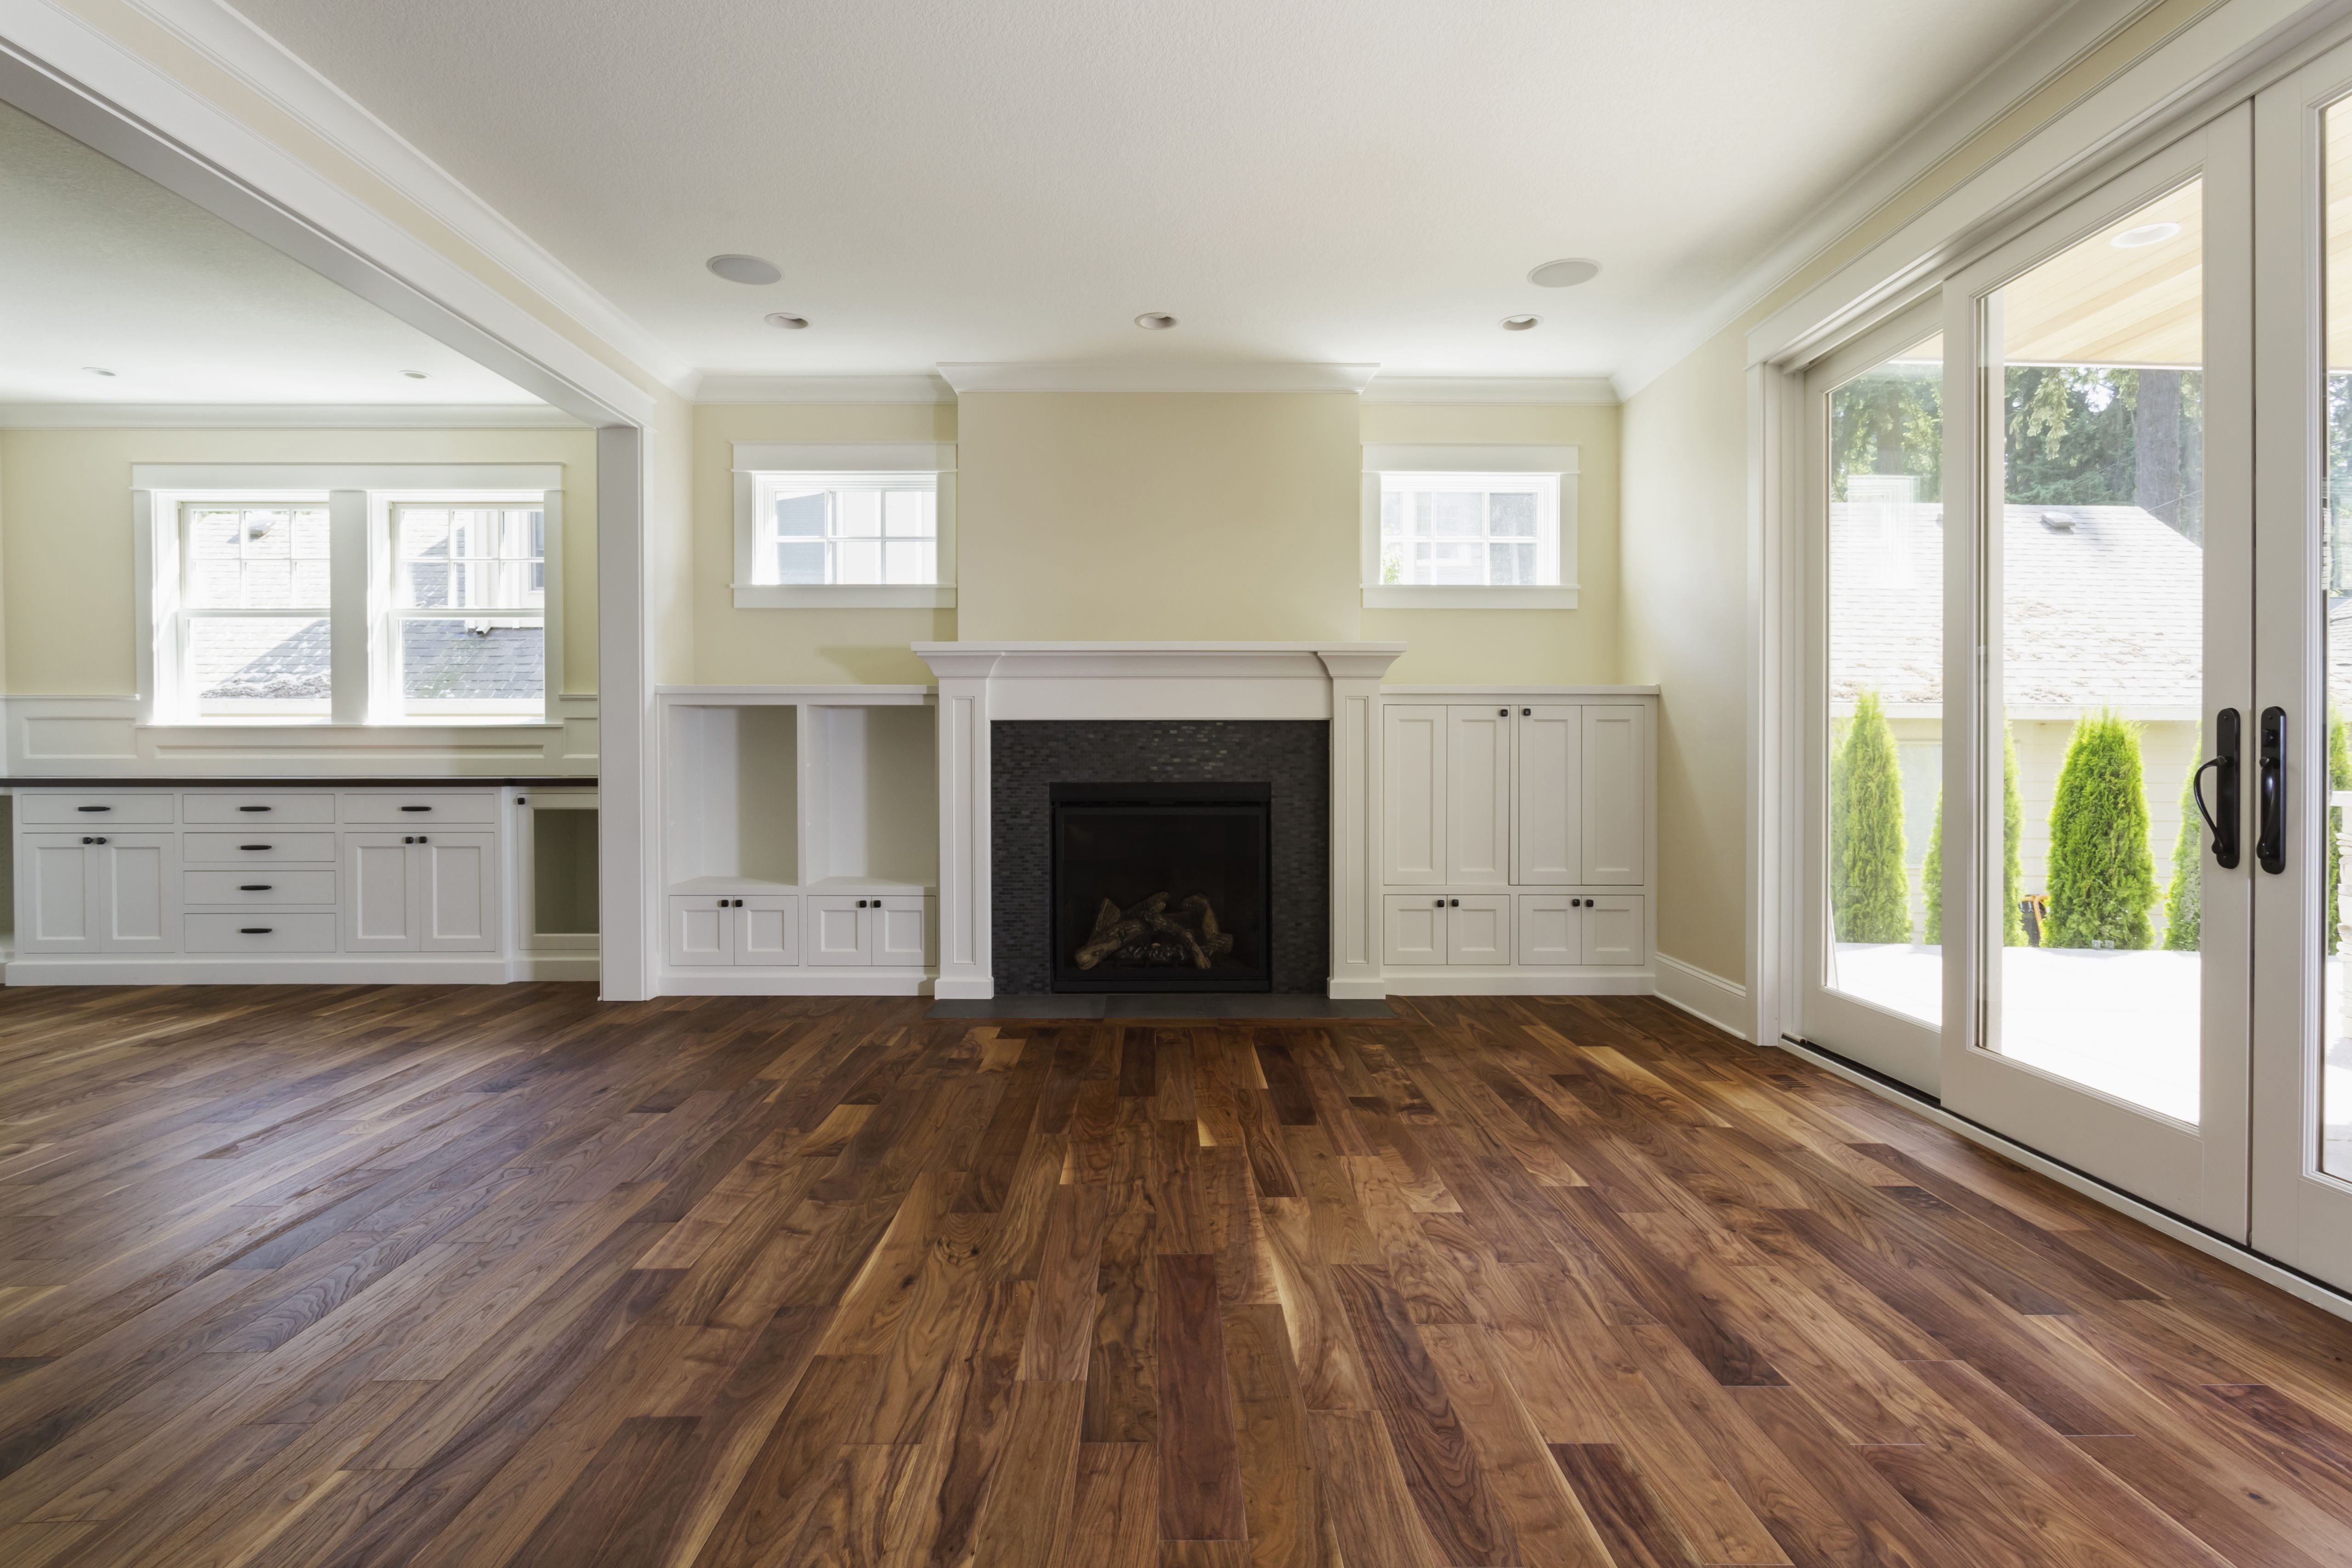 11 Best Best Hardwood Floors for Small Spaces 2023 free download best hardwood floors for small spaces of the pros and cons of prefinished hardwood flooring with fireplace and built in shelves in living room 482143011 57bef8e33df78cc16e035397